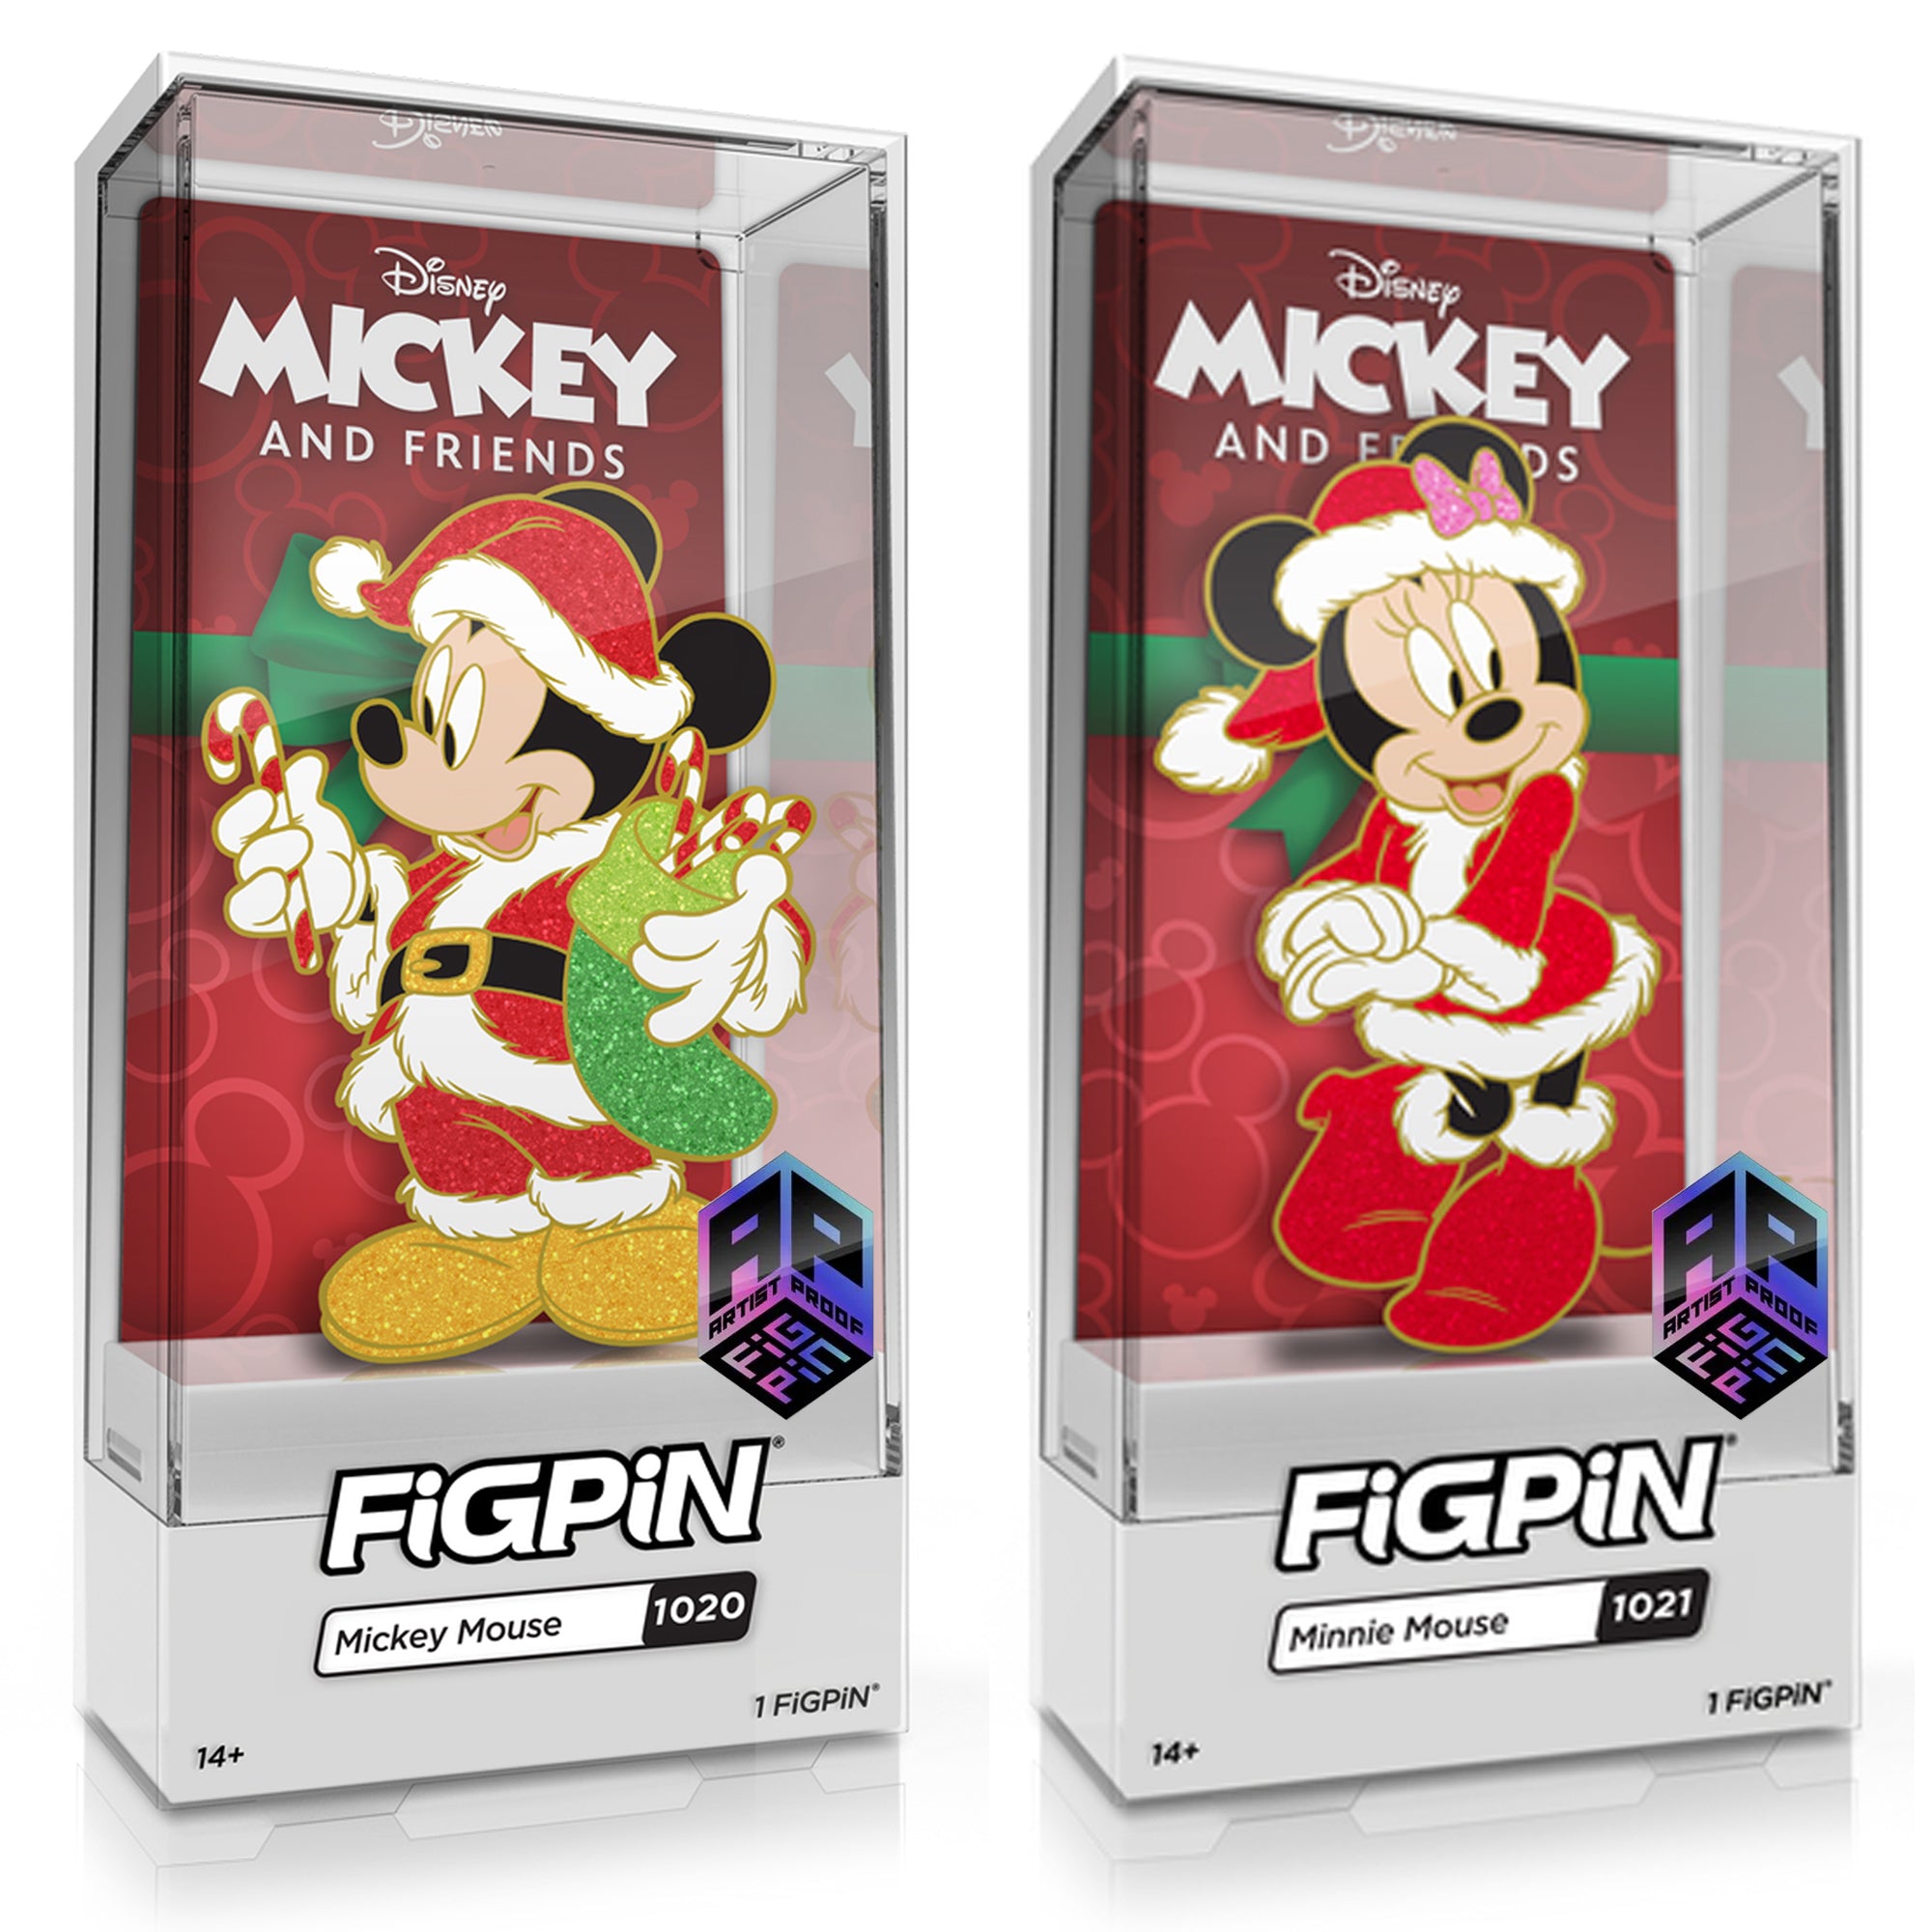 Disney Mickey & Minnie Mouse 3" Collectible Pin Limited Edition 500 ARTIST PROOF SET - NEW RELEASE